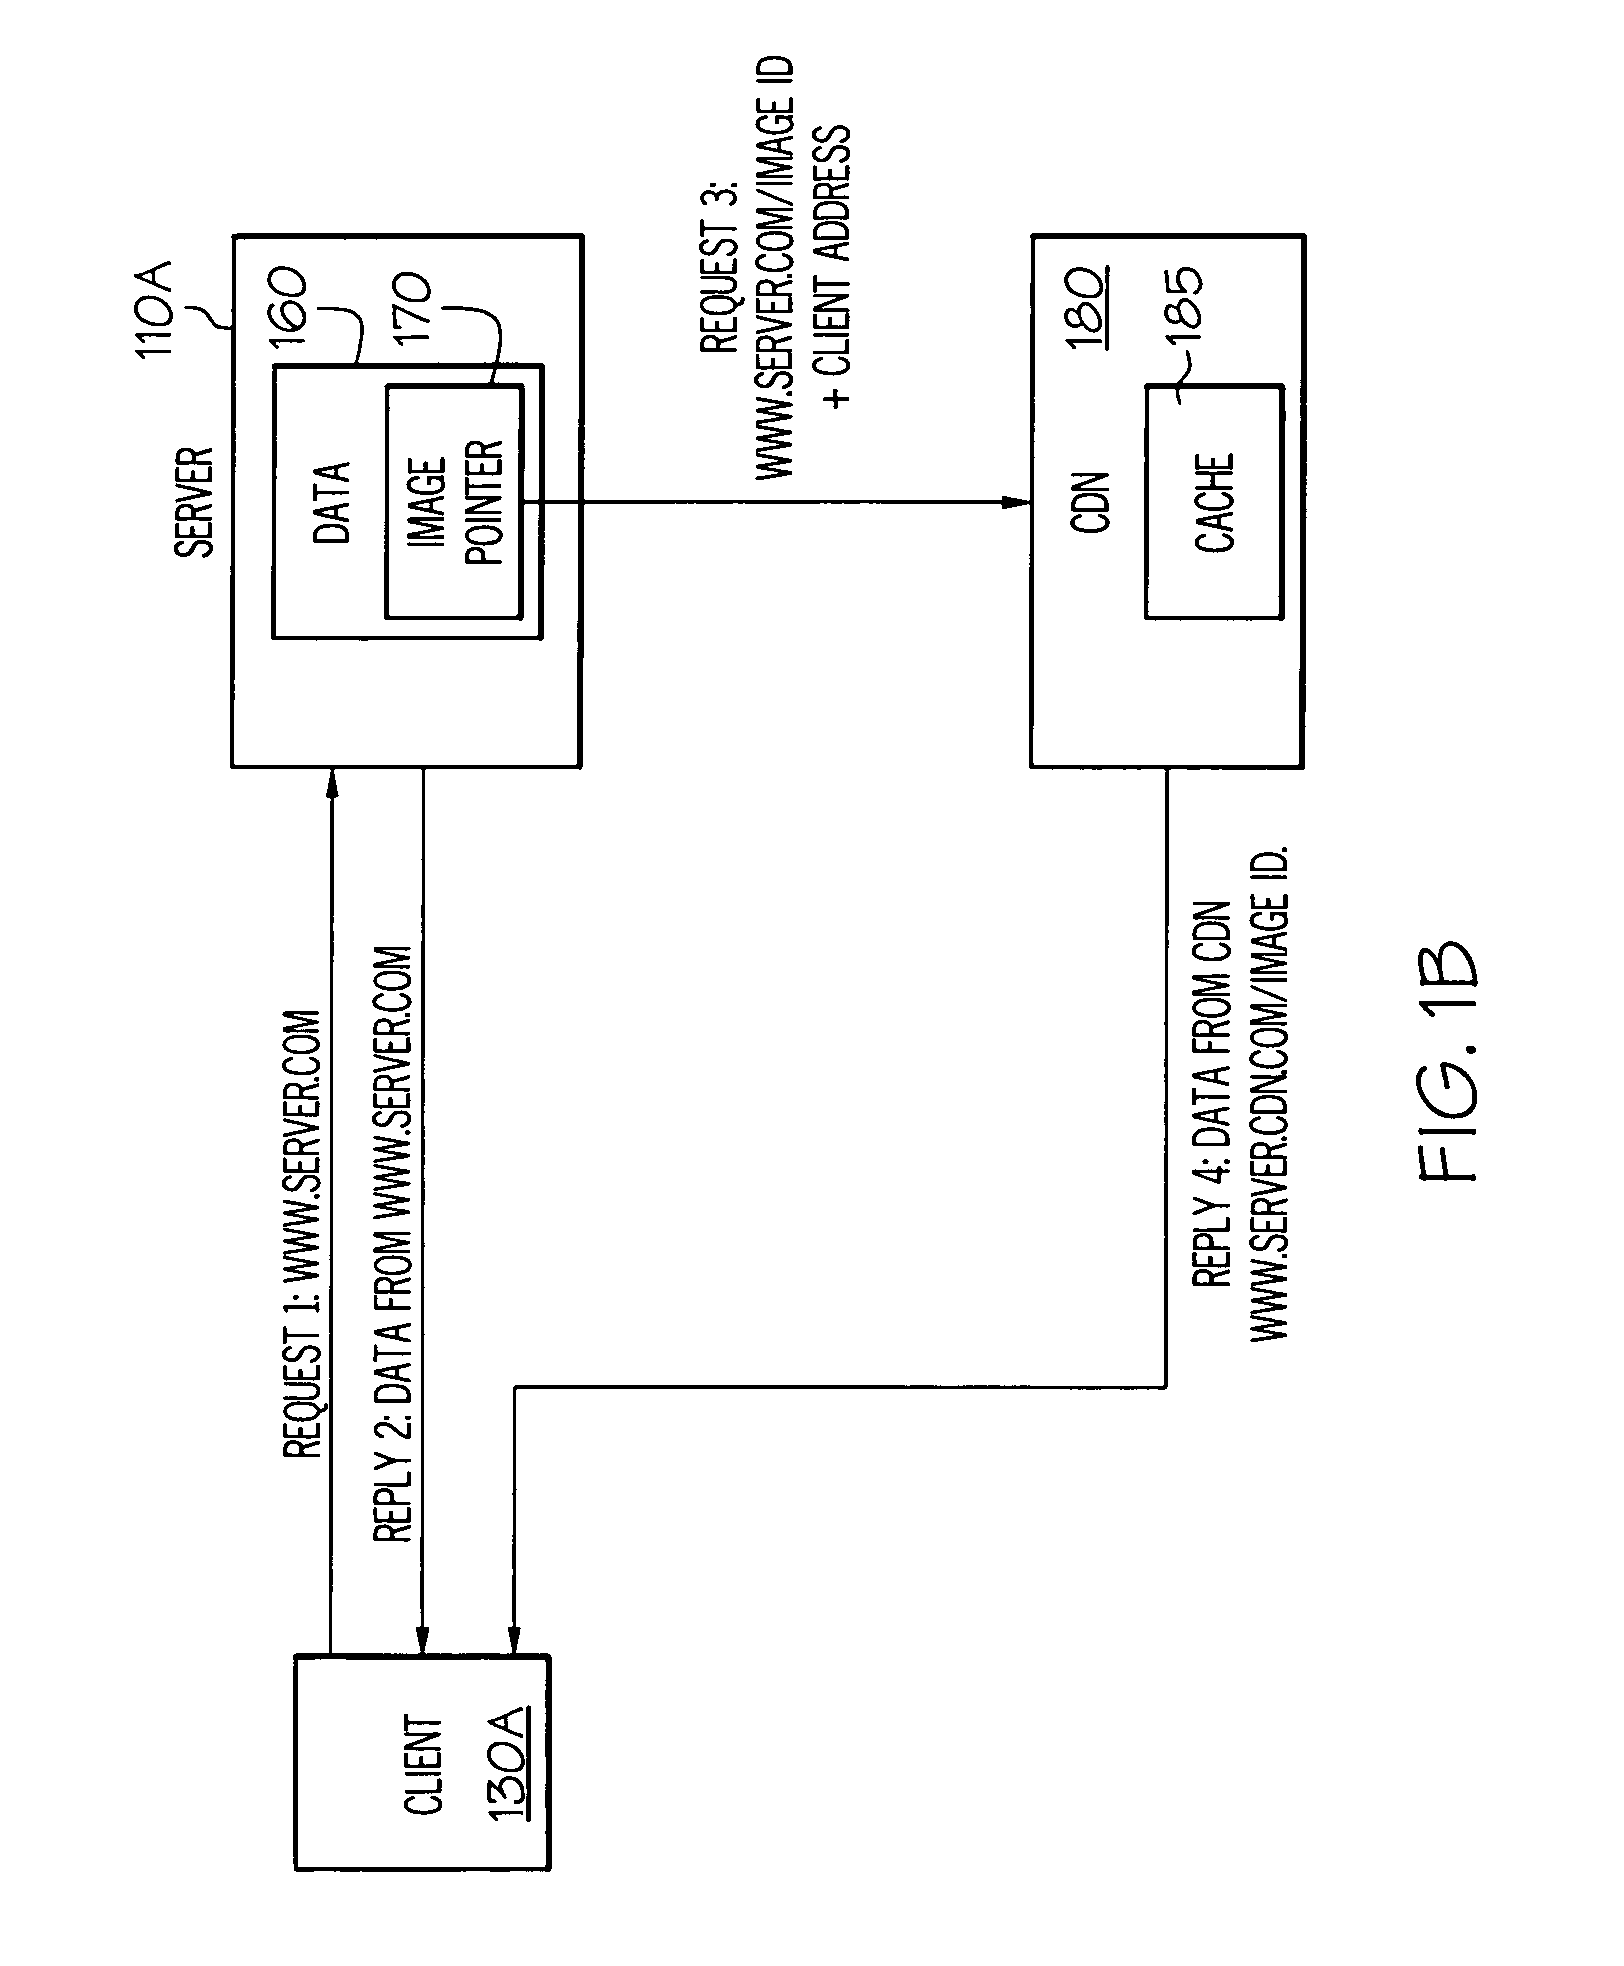 Method and apparatus for hosting a network camera with image degradation